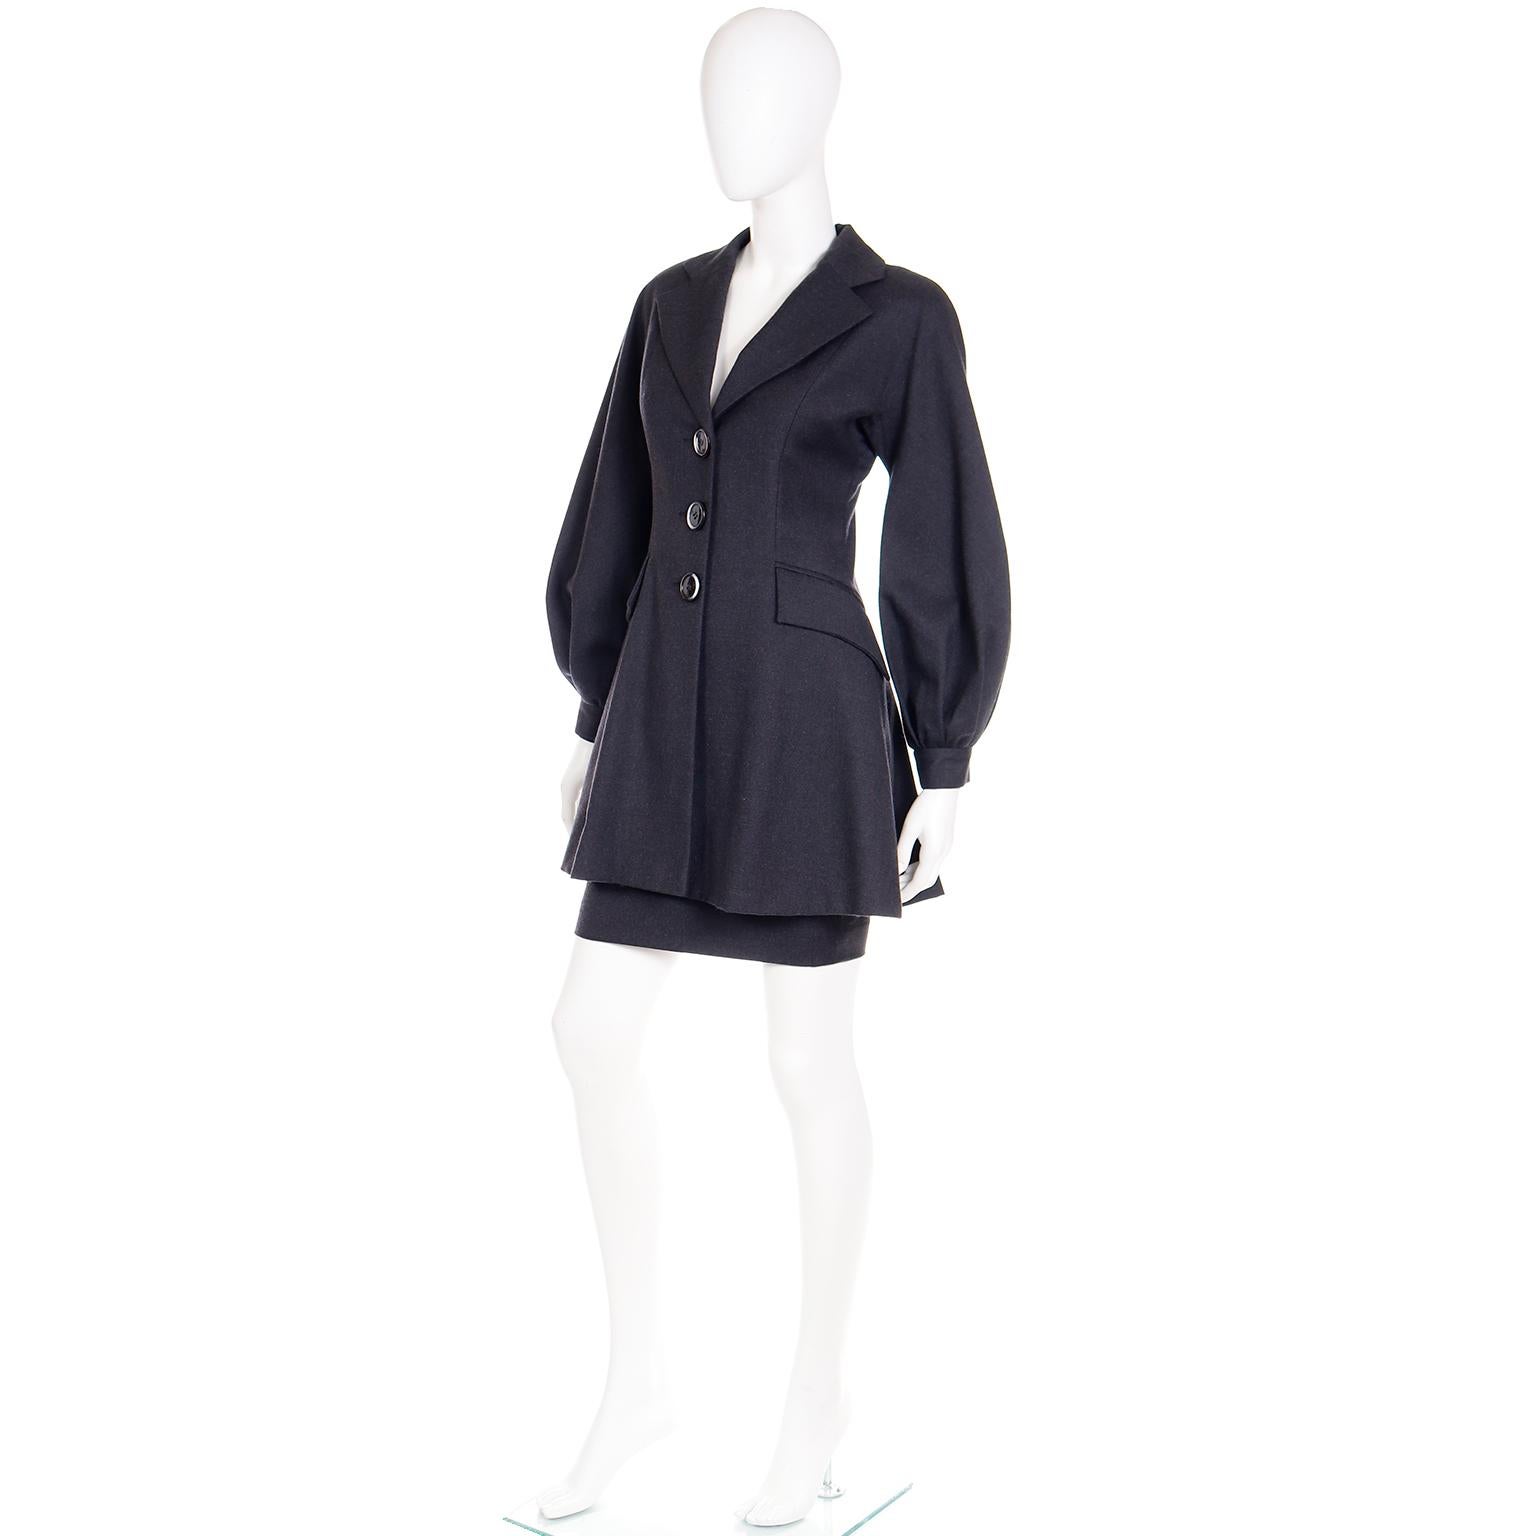 1990s Vintage Christian Dior Demi Couture Numbered Peplum Jacket and Skirt Suit In Excellent Condition For Sale In Portland, OR